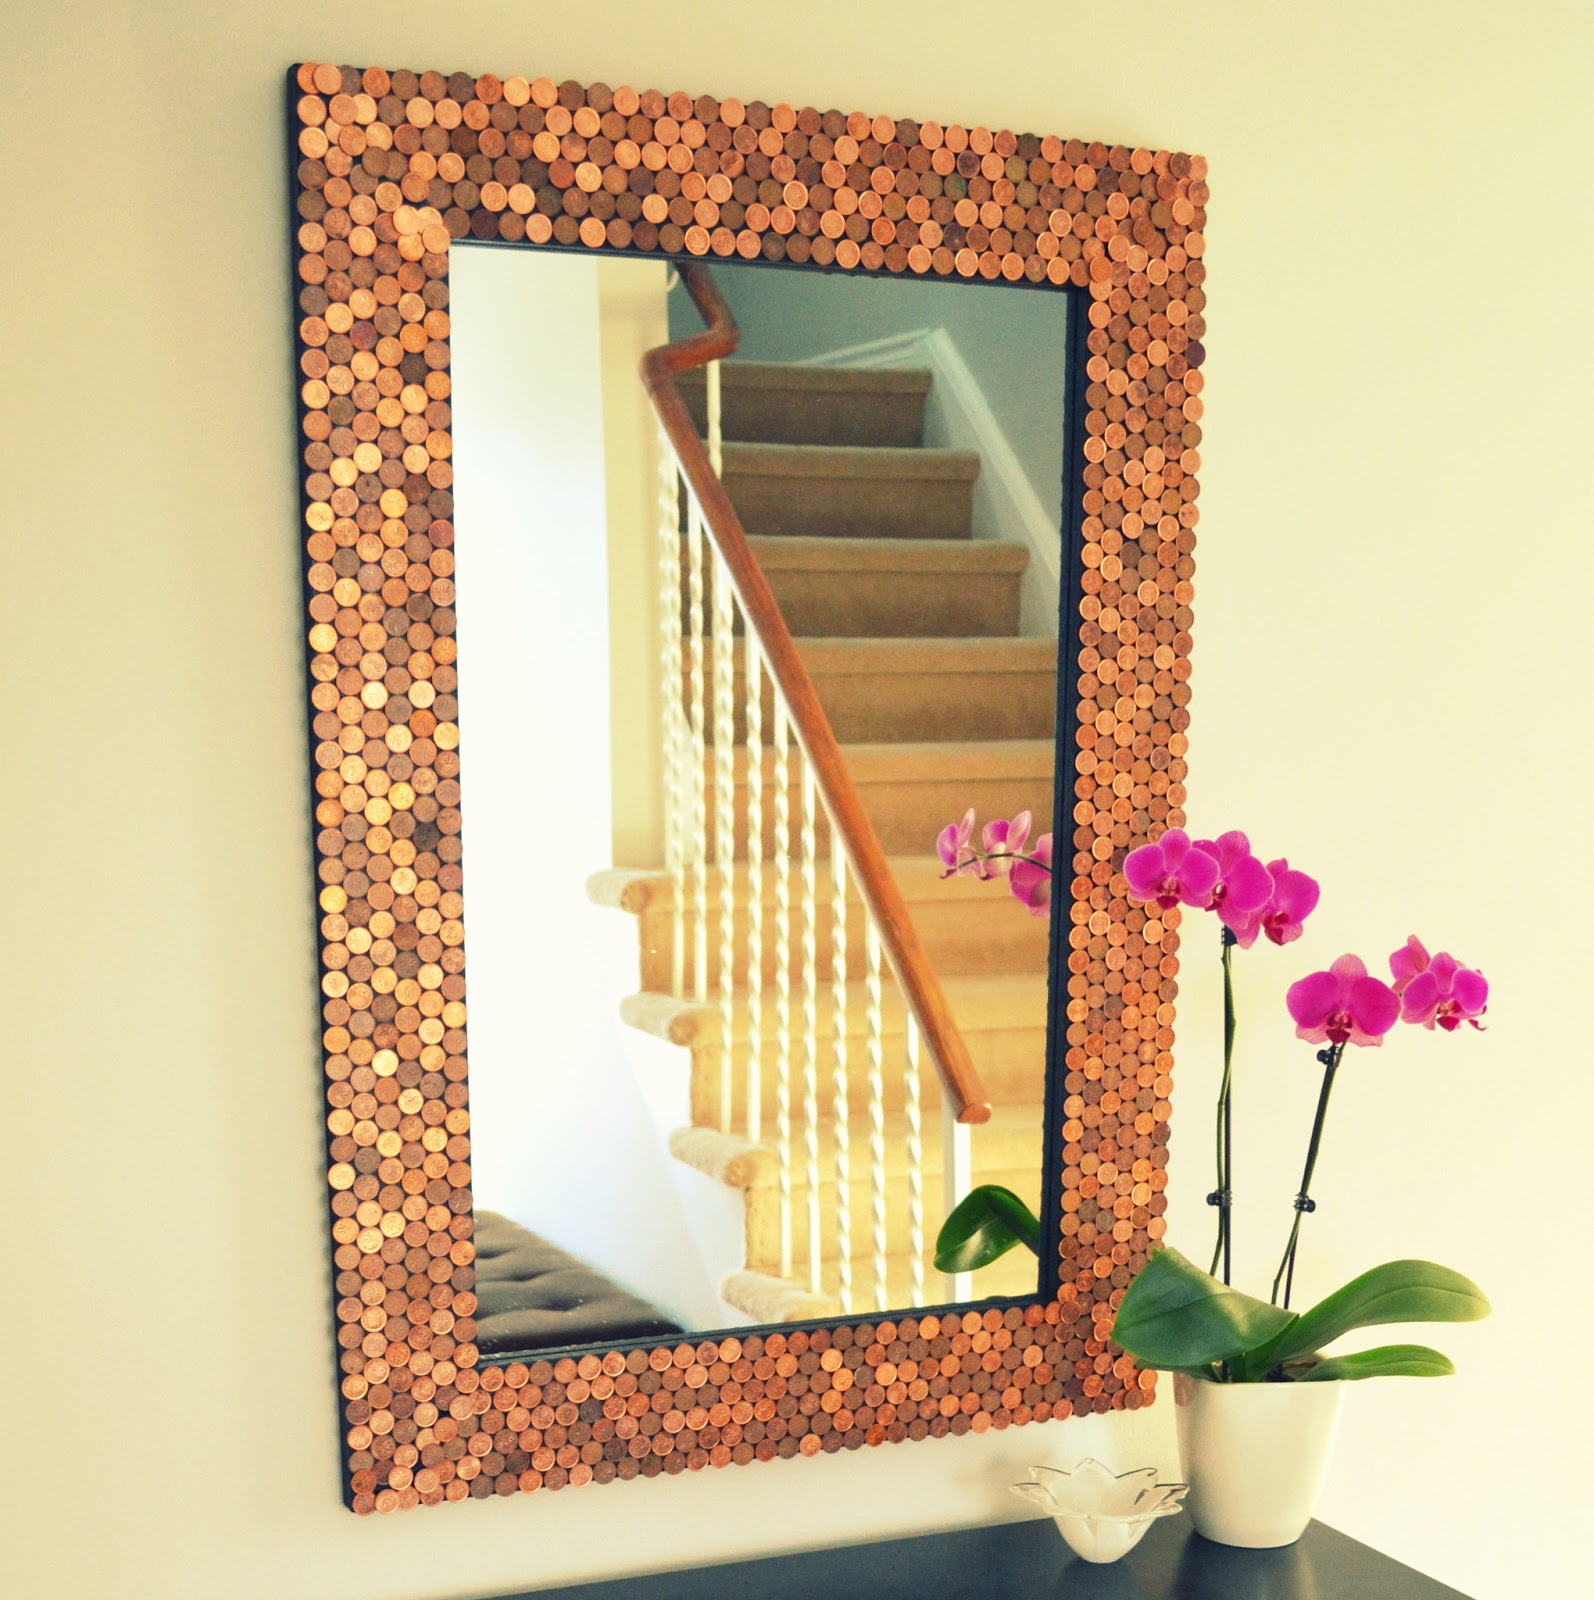  Penny Tiled Mirror